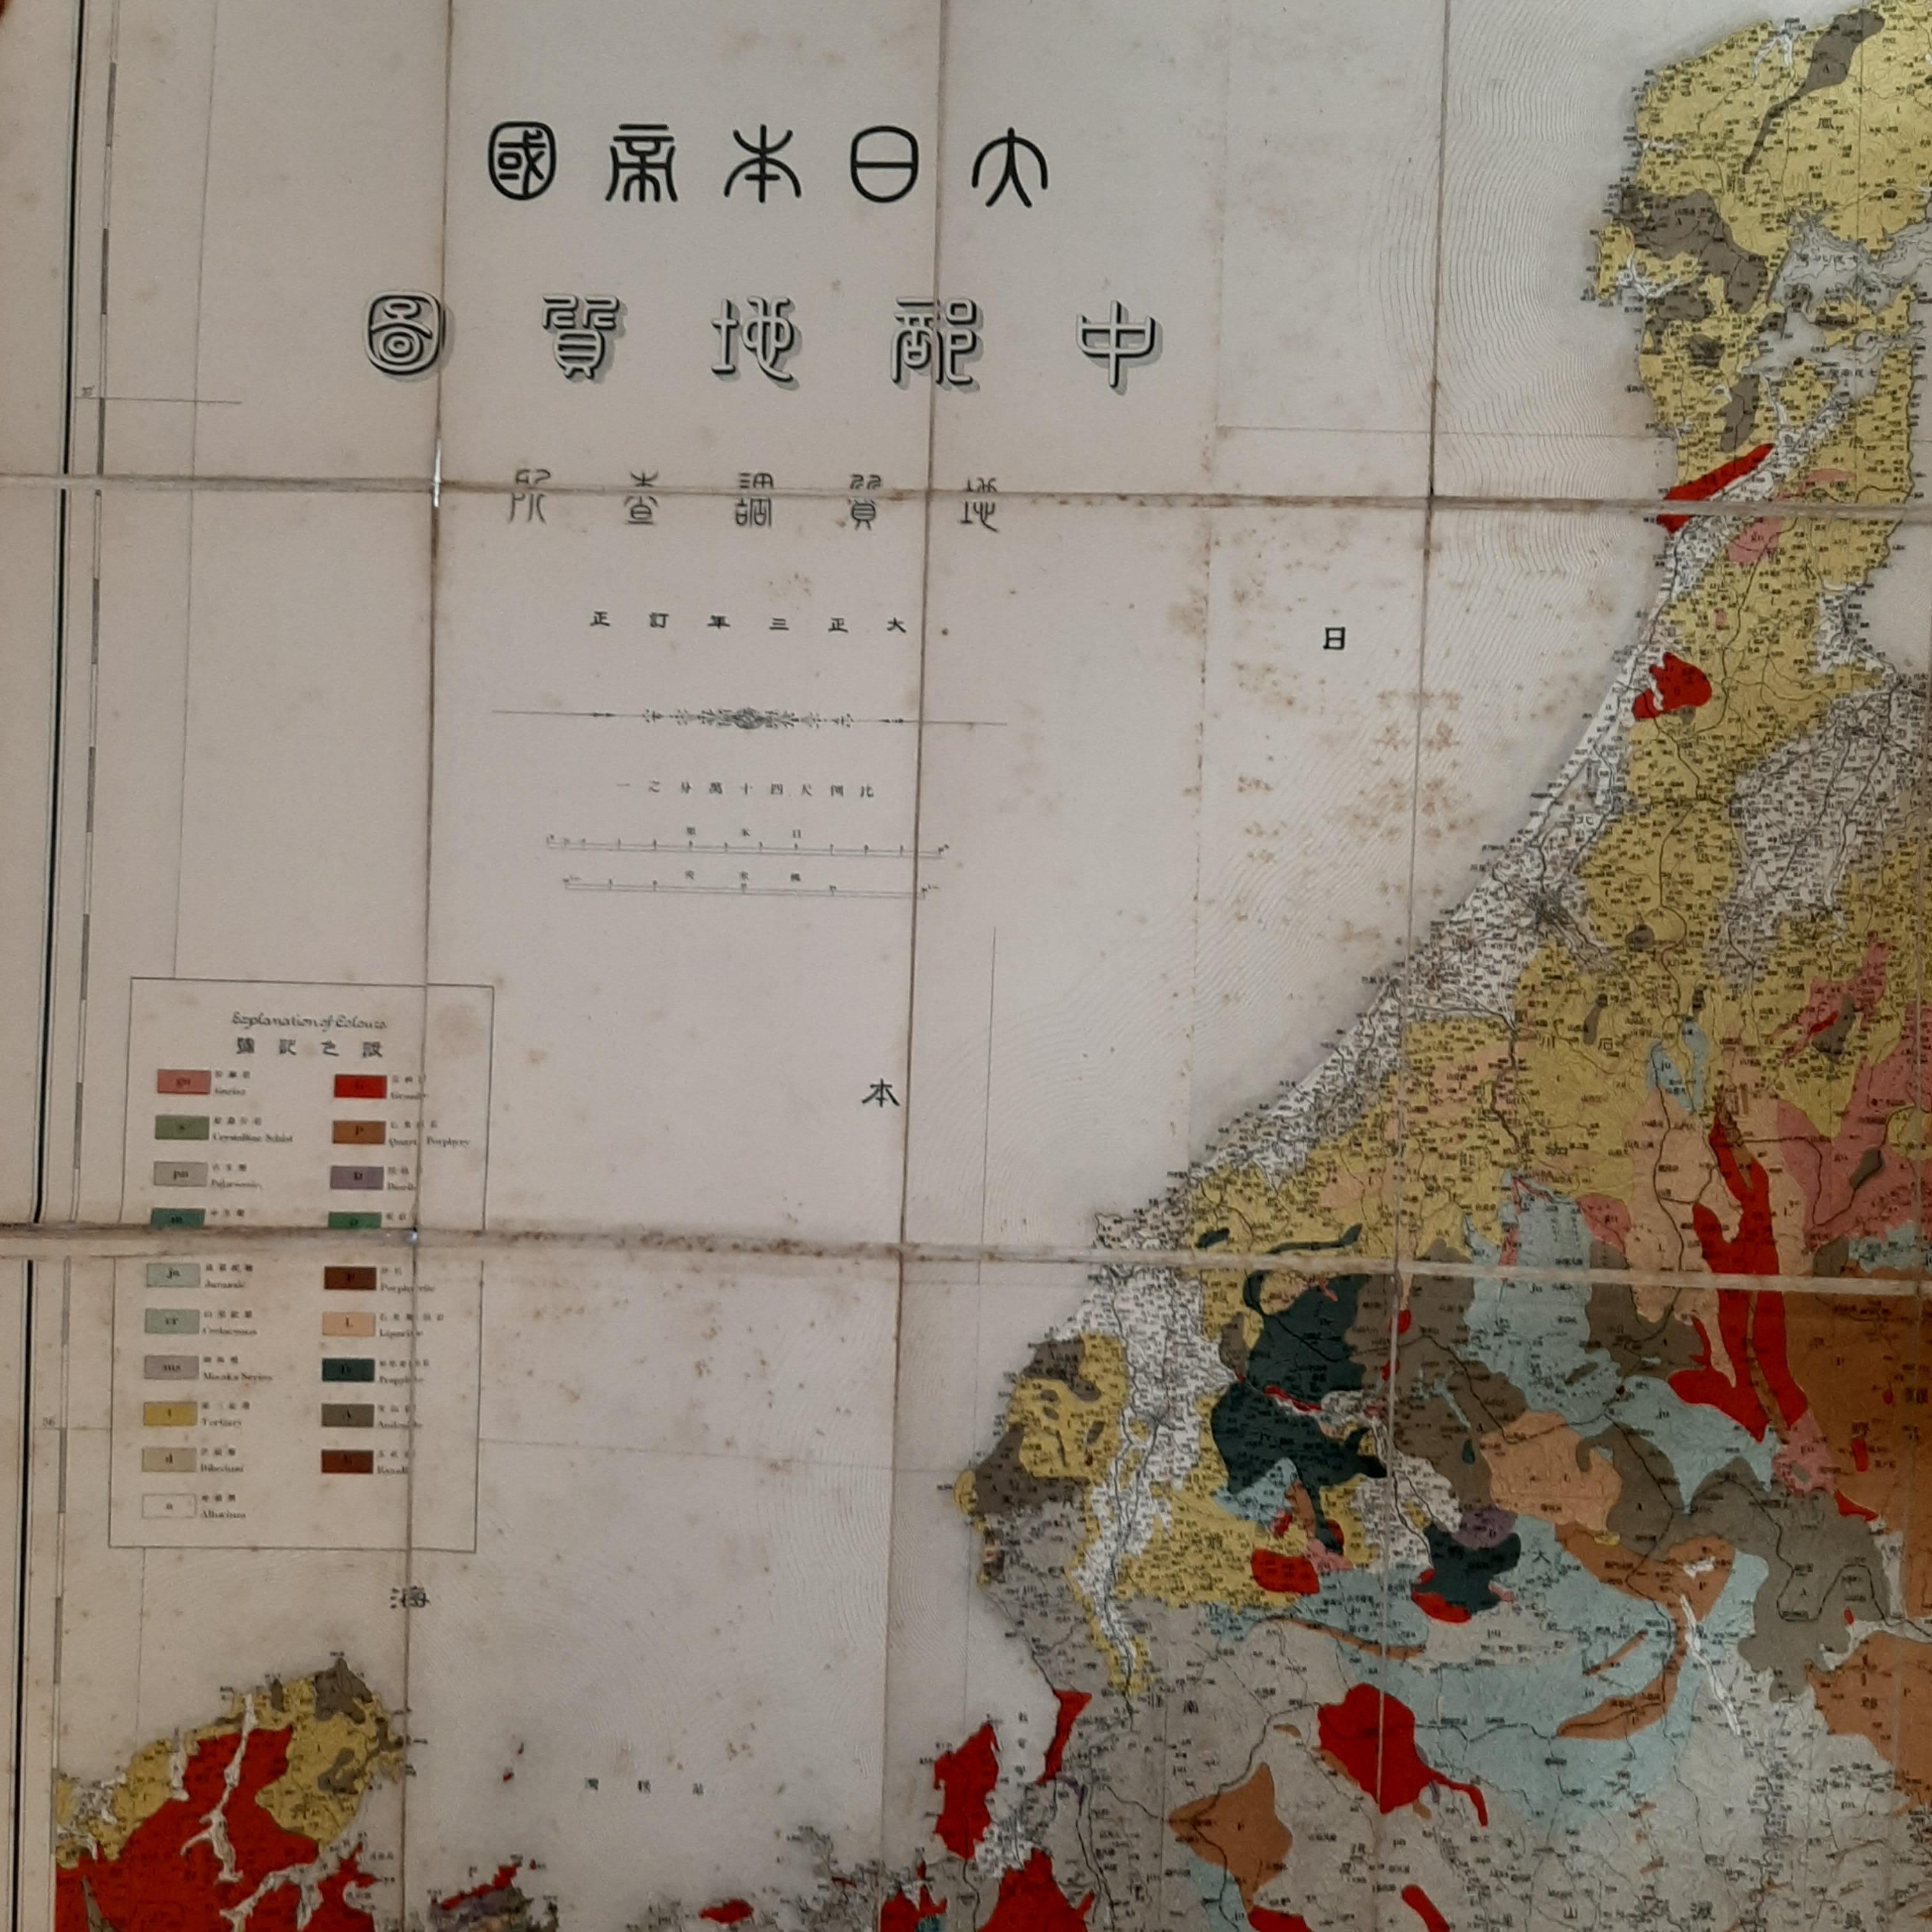 Geological folding map of the area with Wakayama, Nara, Osaka, Mie, and Shiga in Japan, circa 1880:

This map is a geological folding map, which means it was designed to be portable and easily used in the field. Created around 1880, it represents a